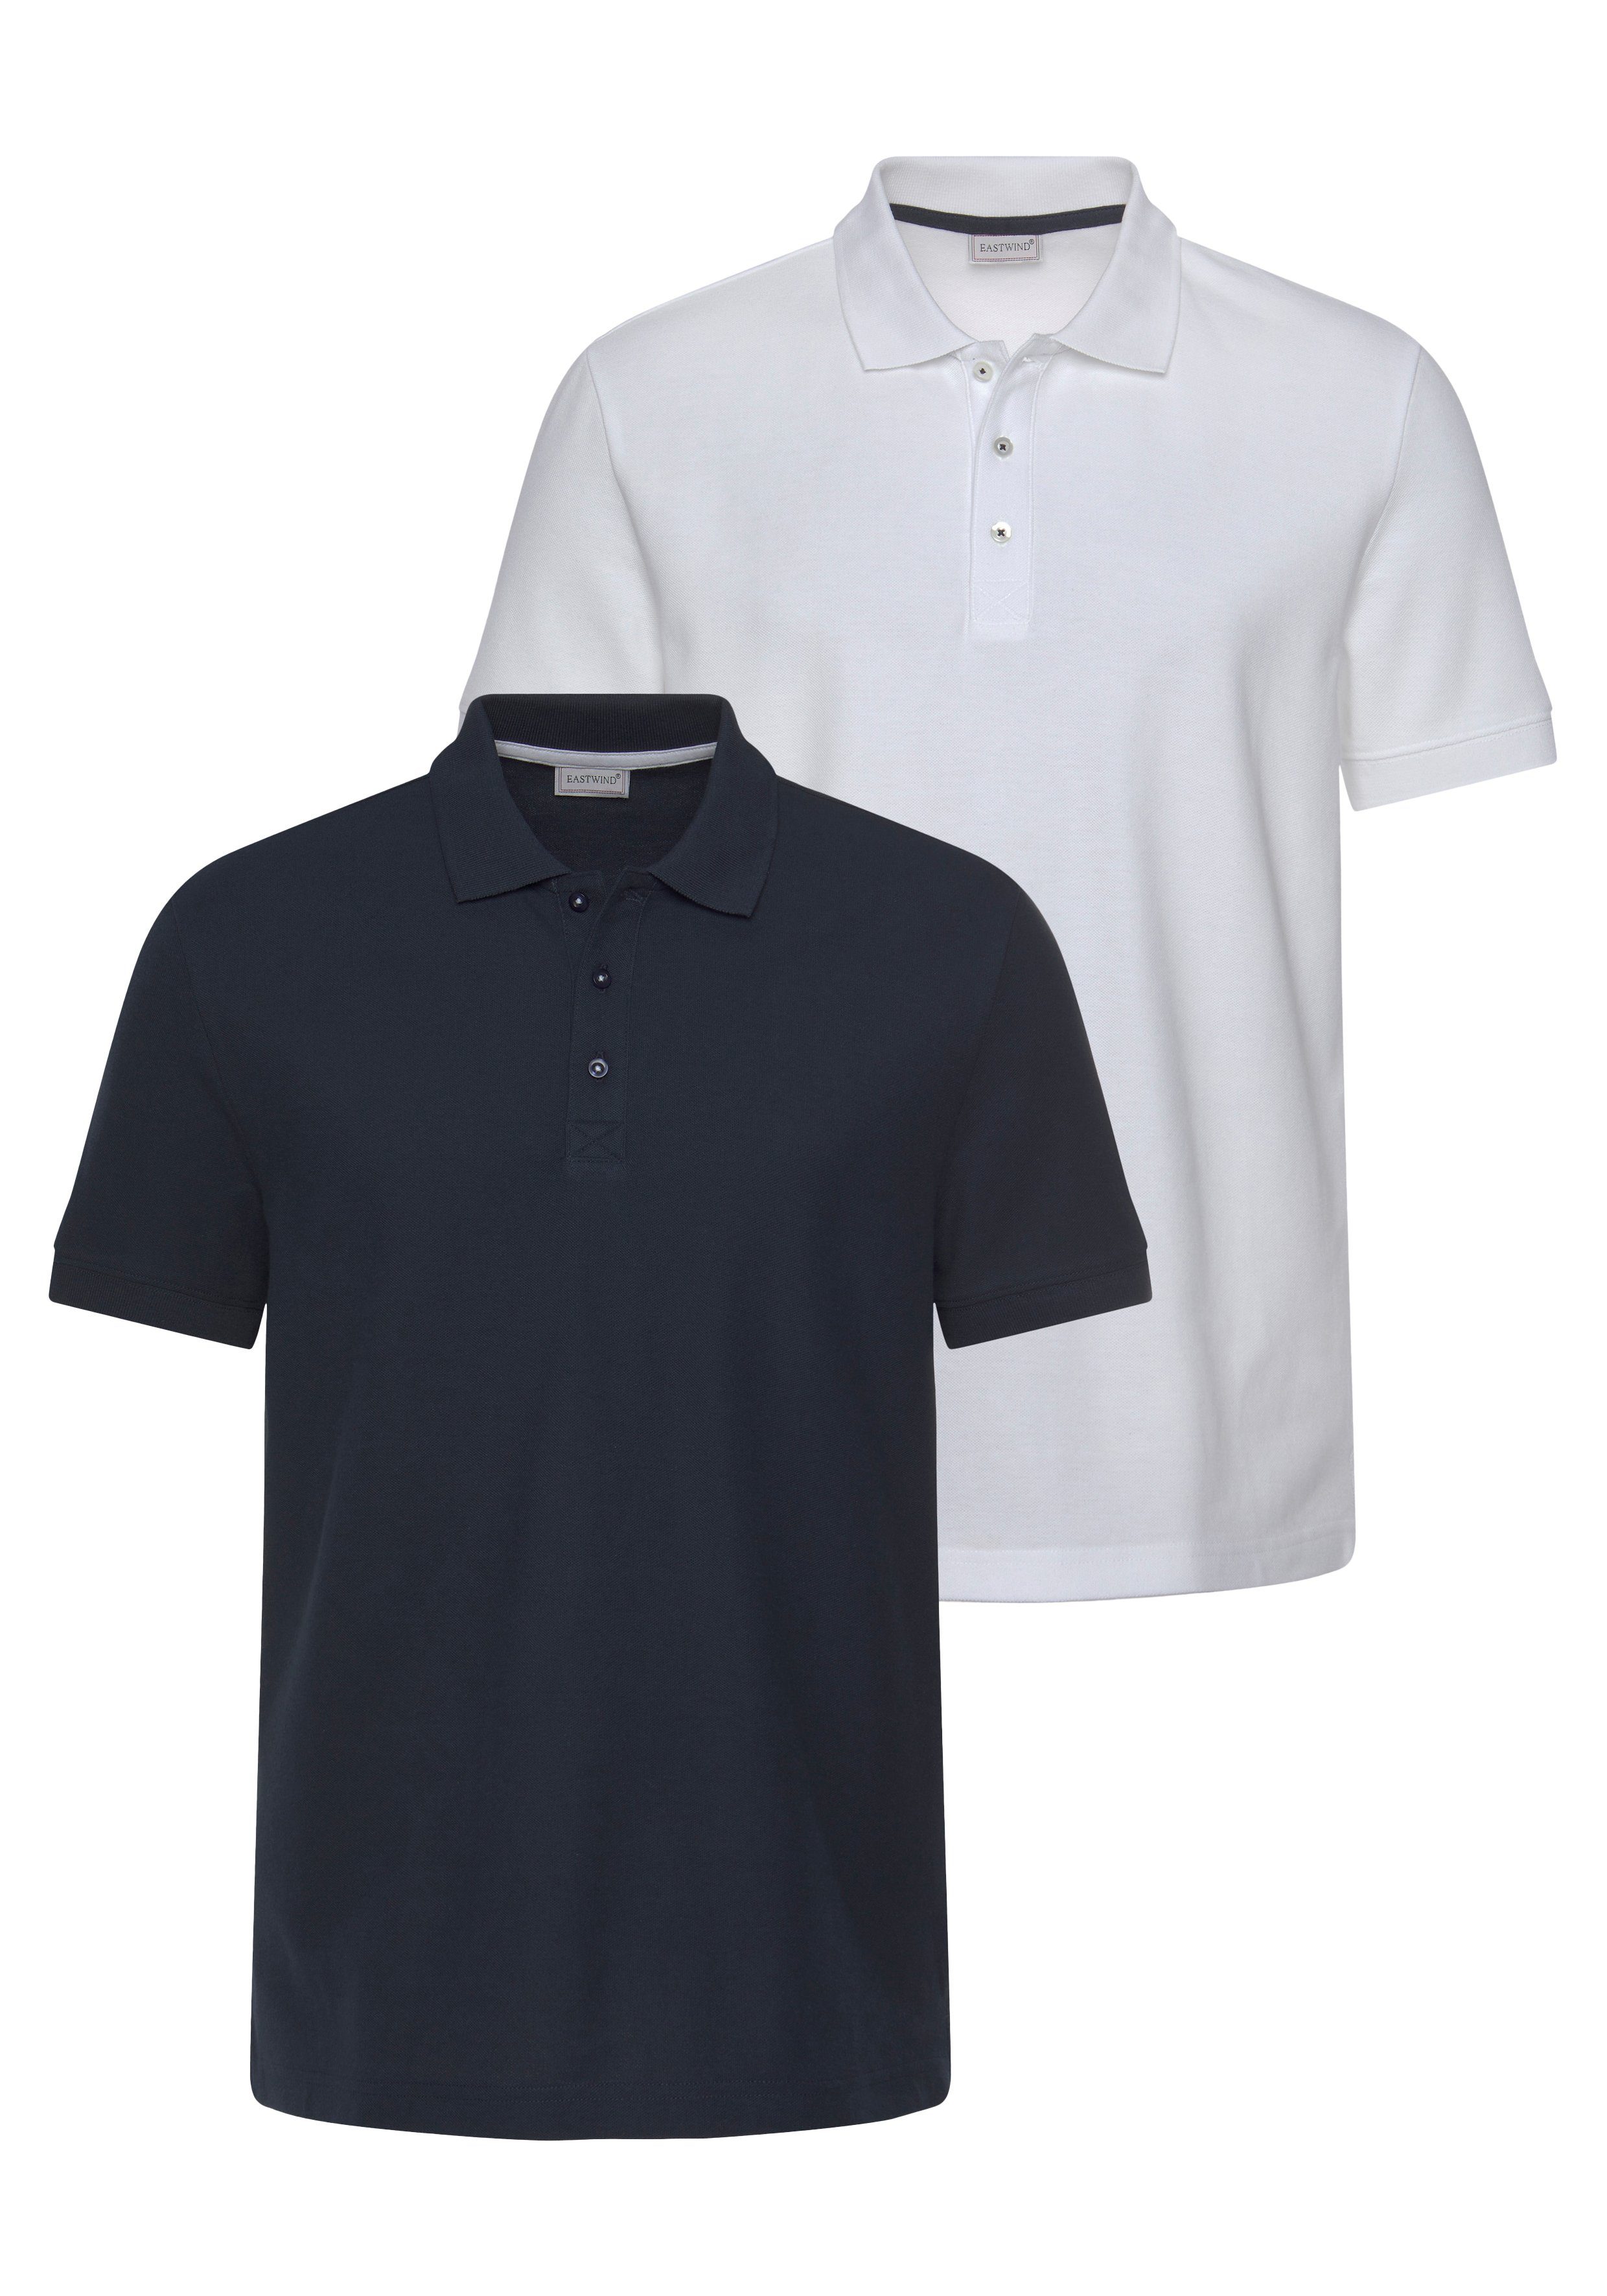 Eastwind Poloshirt Double Pack Polo, navy+white (2er-Pack) marine-weiß